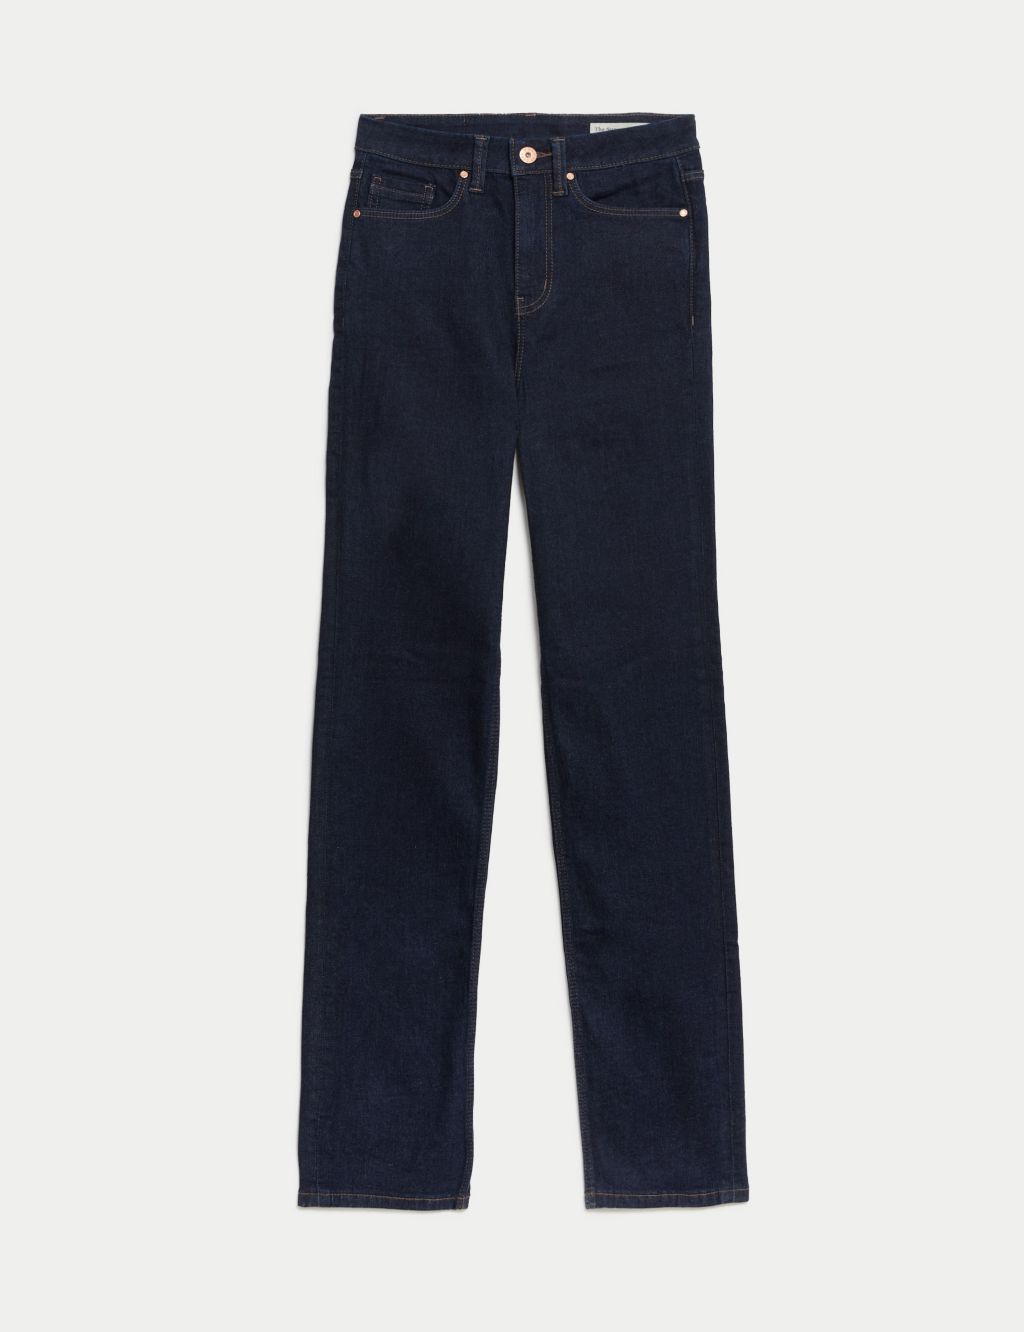 Sienna Supersoft Straight Leg Jeans image 2